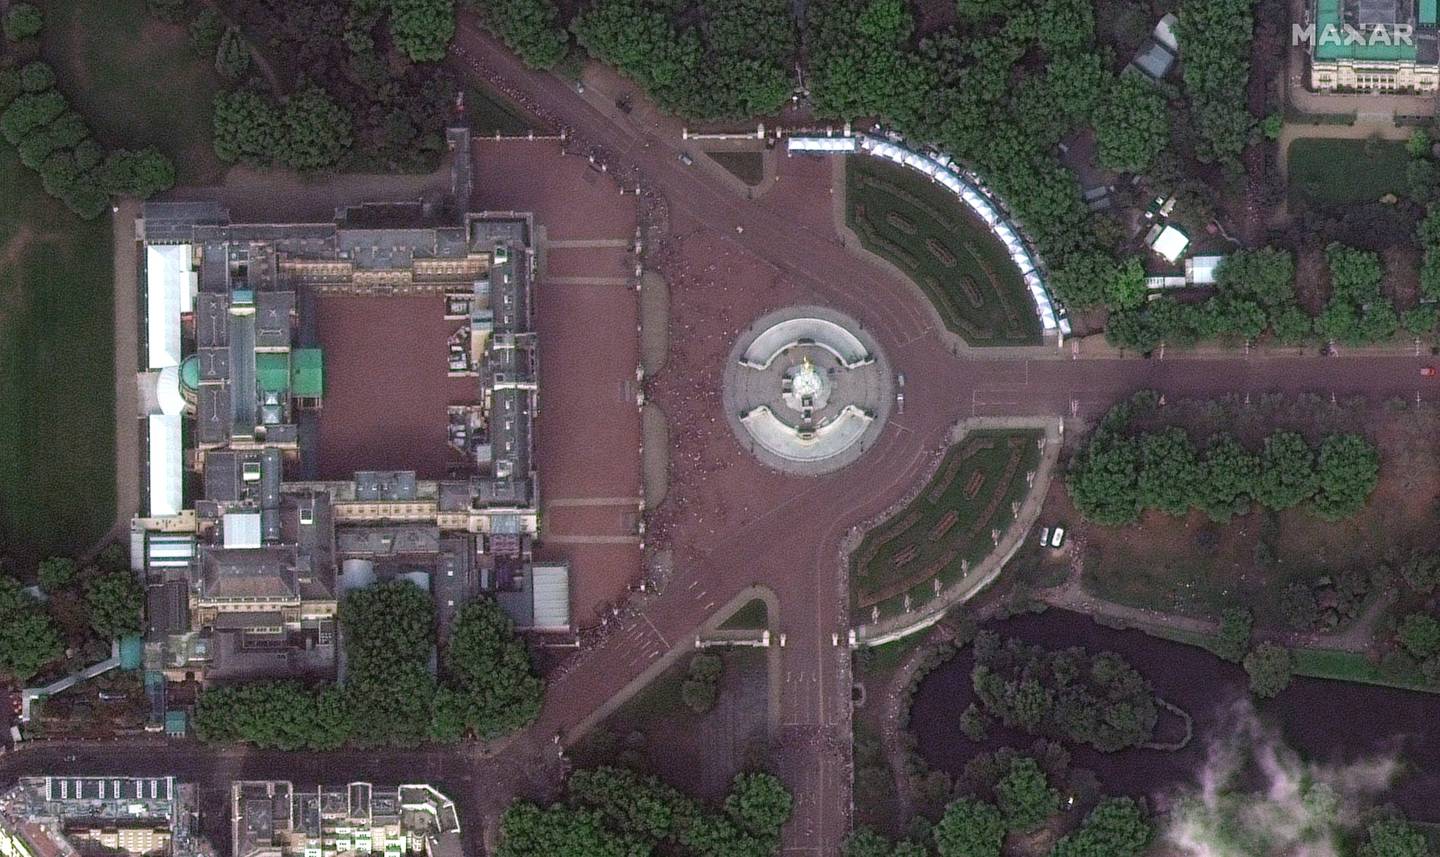 A queue for Queen Elizabeth II's lying in state is visible from space. Photo: Maxar Technologies